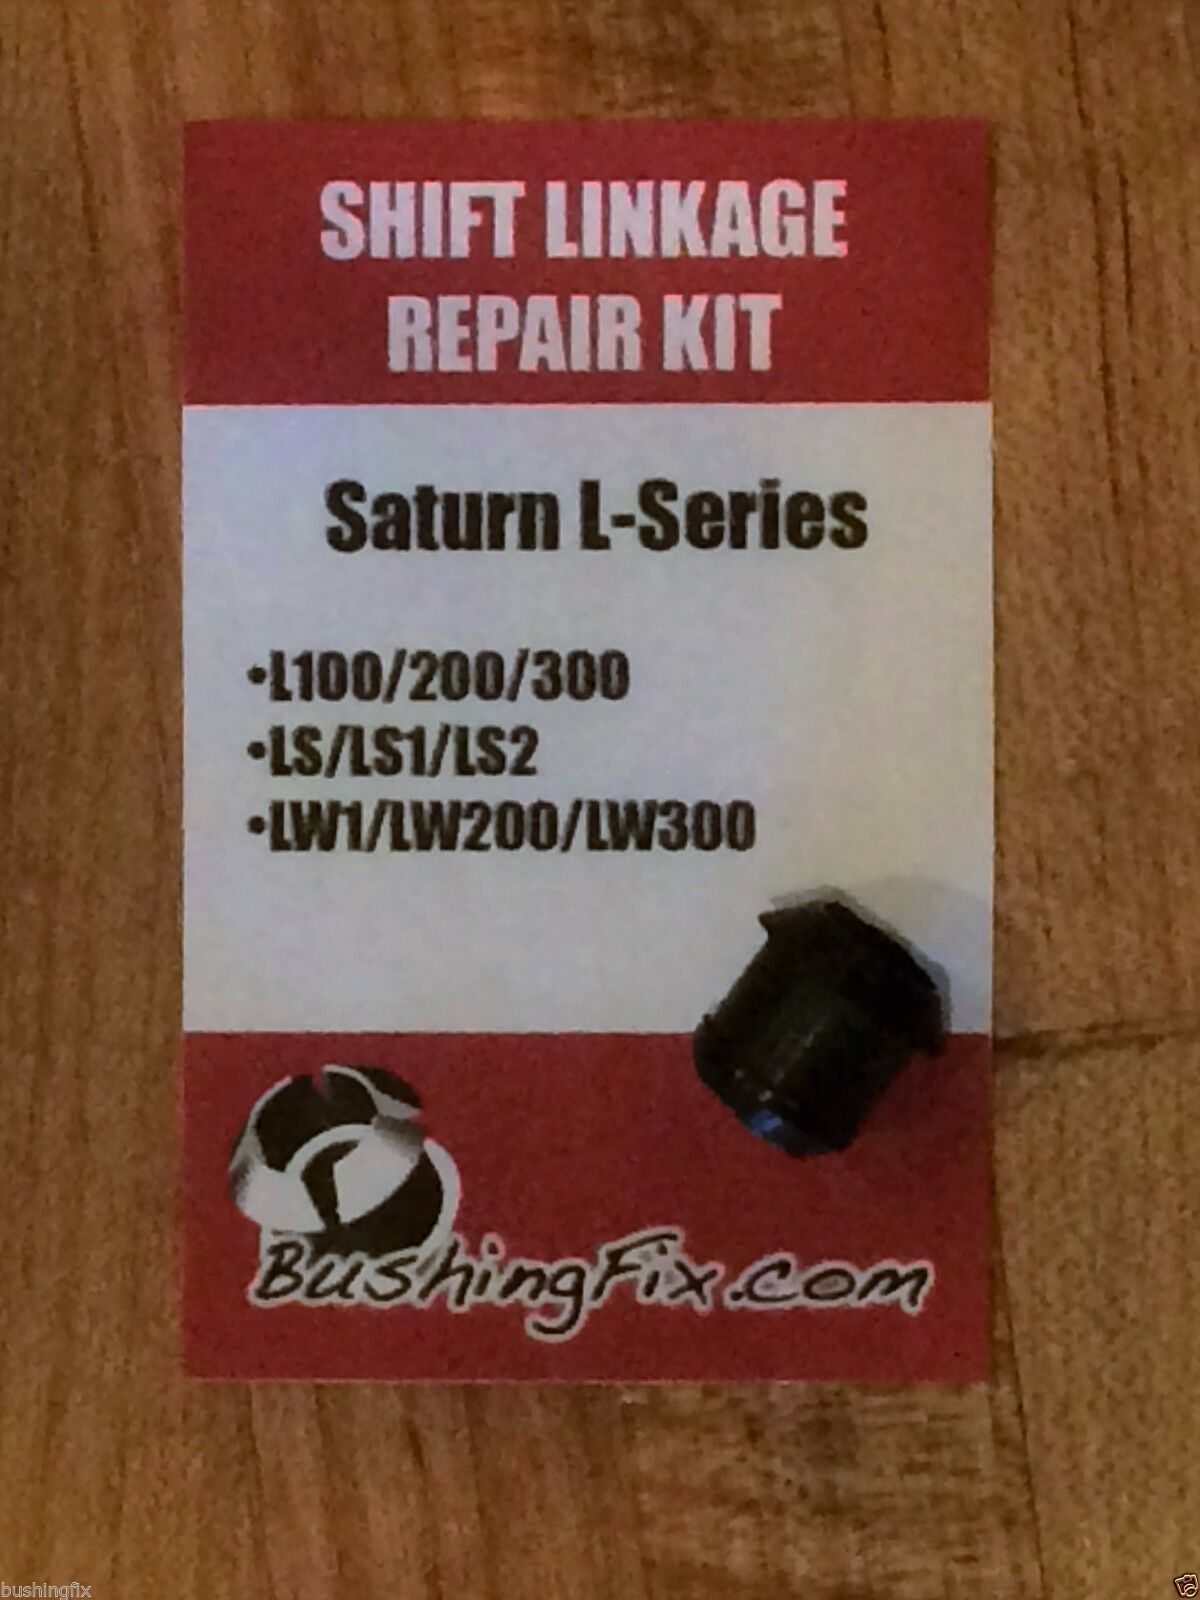 Bushing Fix - Saturn ls2 shifter cable repair kit with bushing-easy installation! 90523858